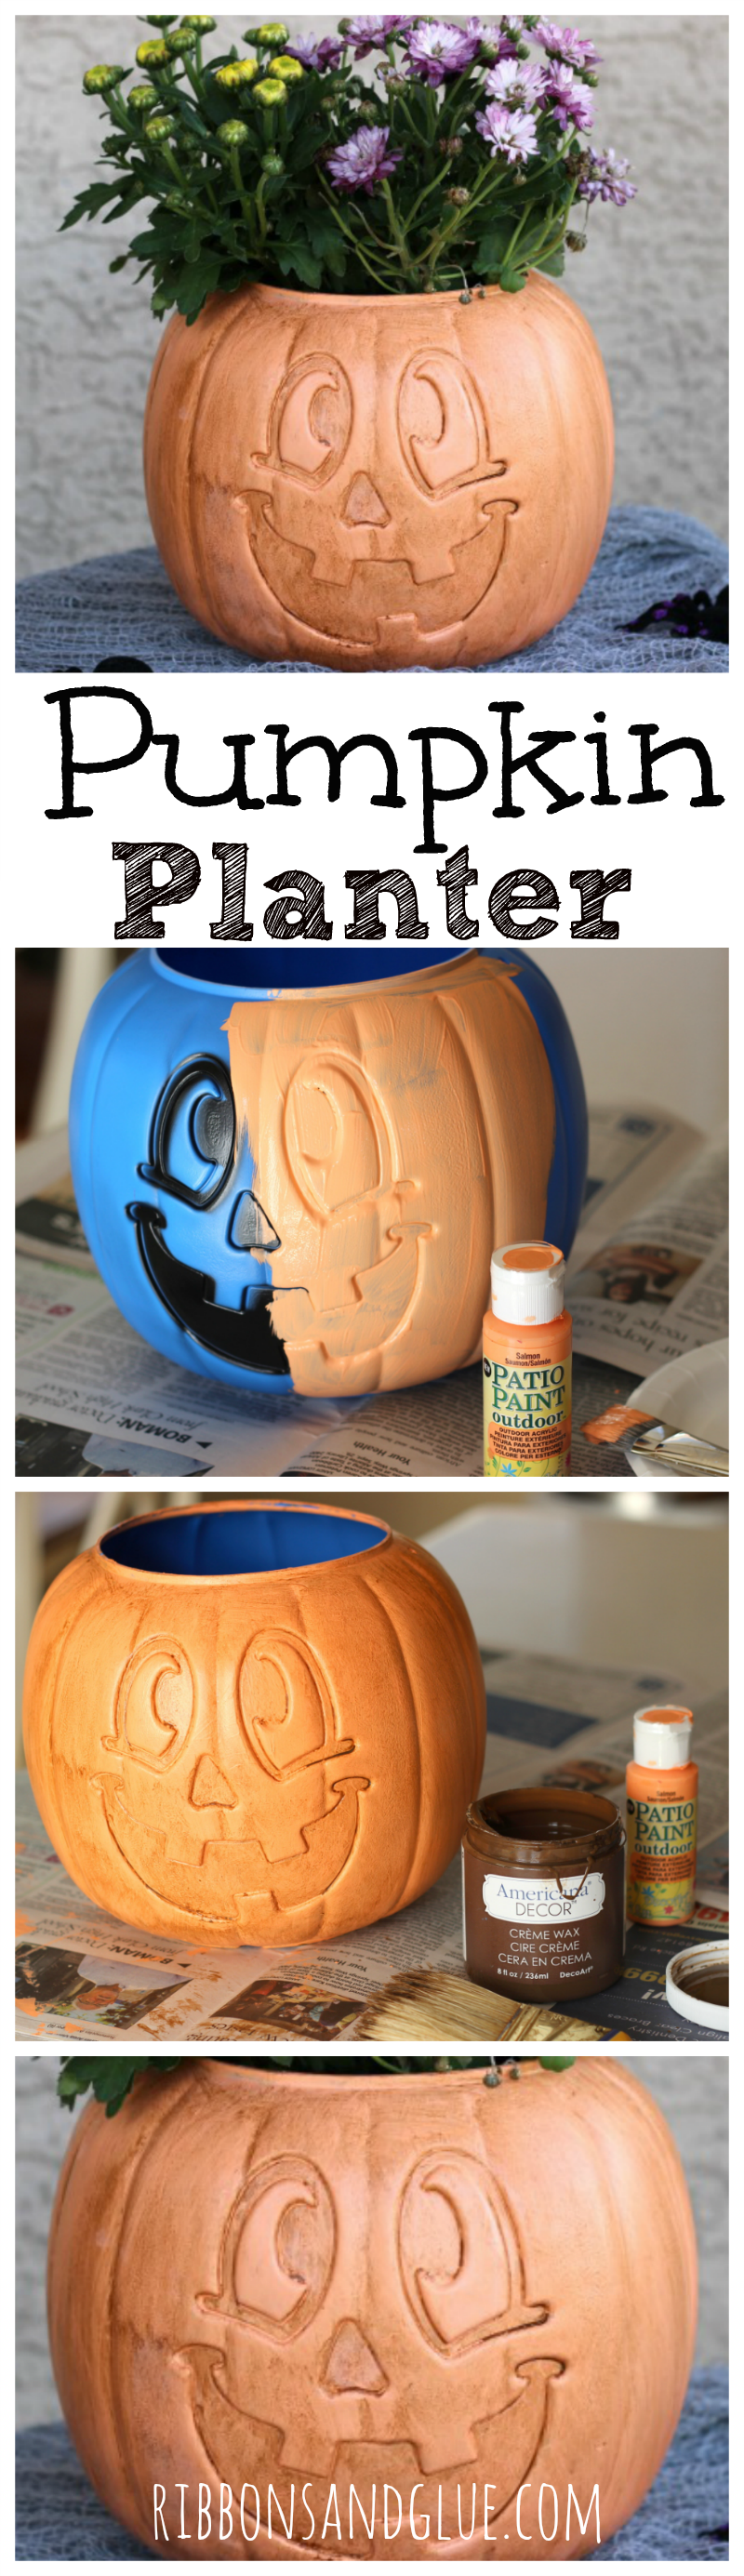 DIY Pumpkin Planter made from a plastic trick or treat bucket painted with a fauz terracotta finish. Easy Halloween DIY project! 